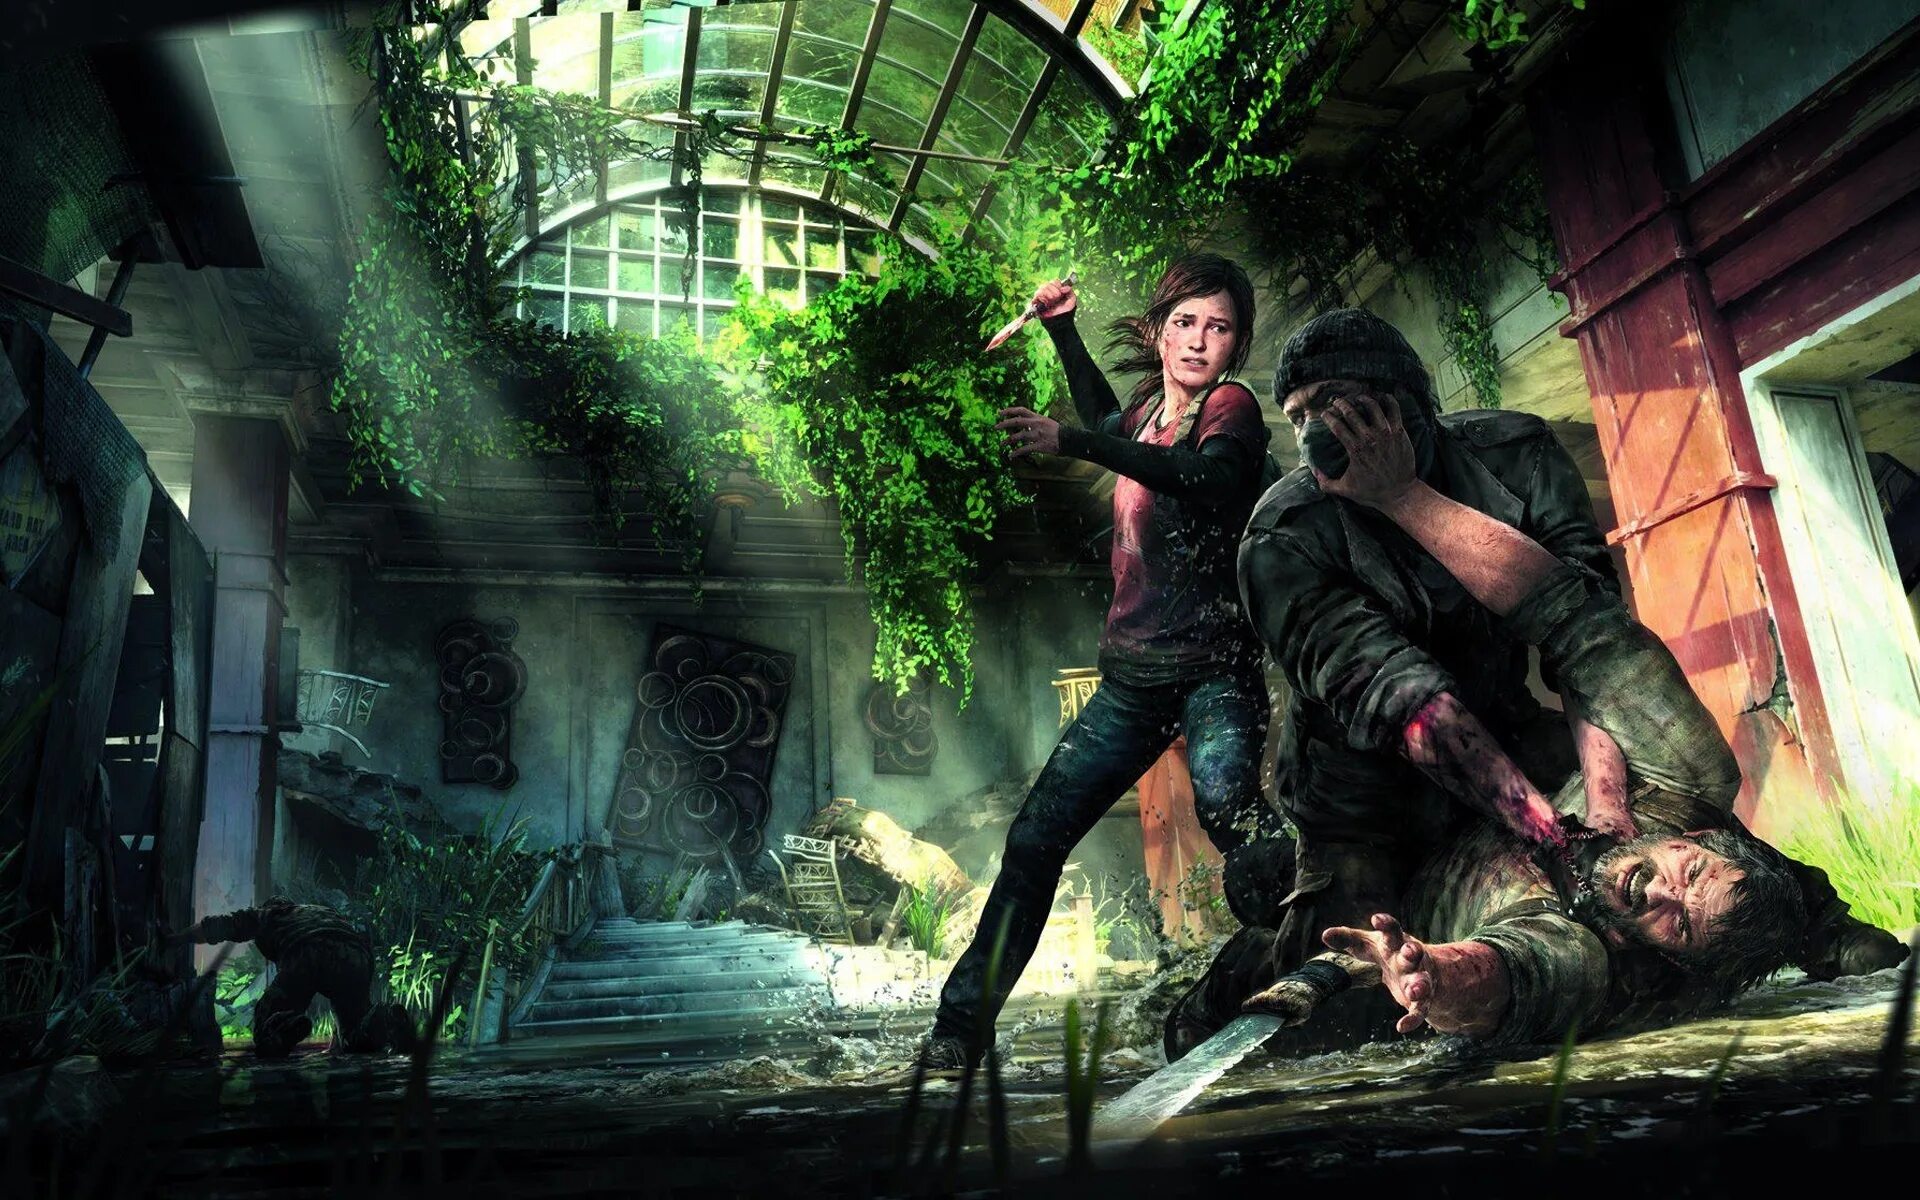 Download the last of us. The last of us. Джоэл the last of us 1 2013. Одни из нас (ps3).